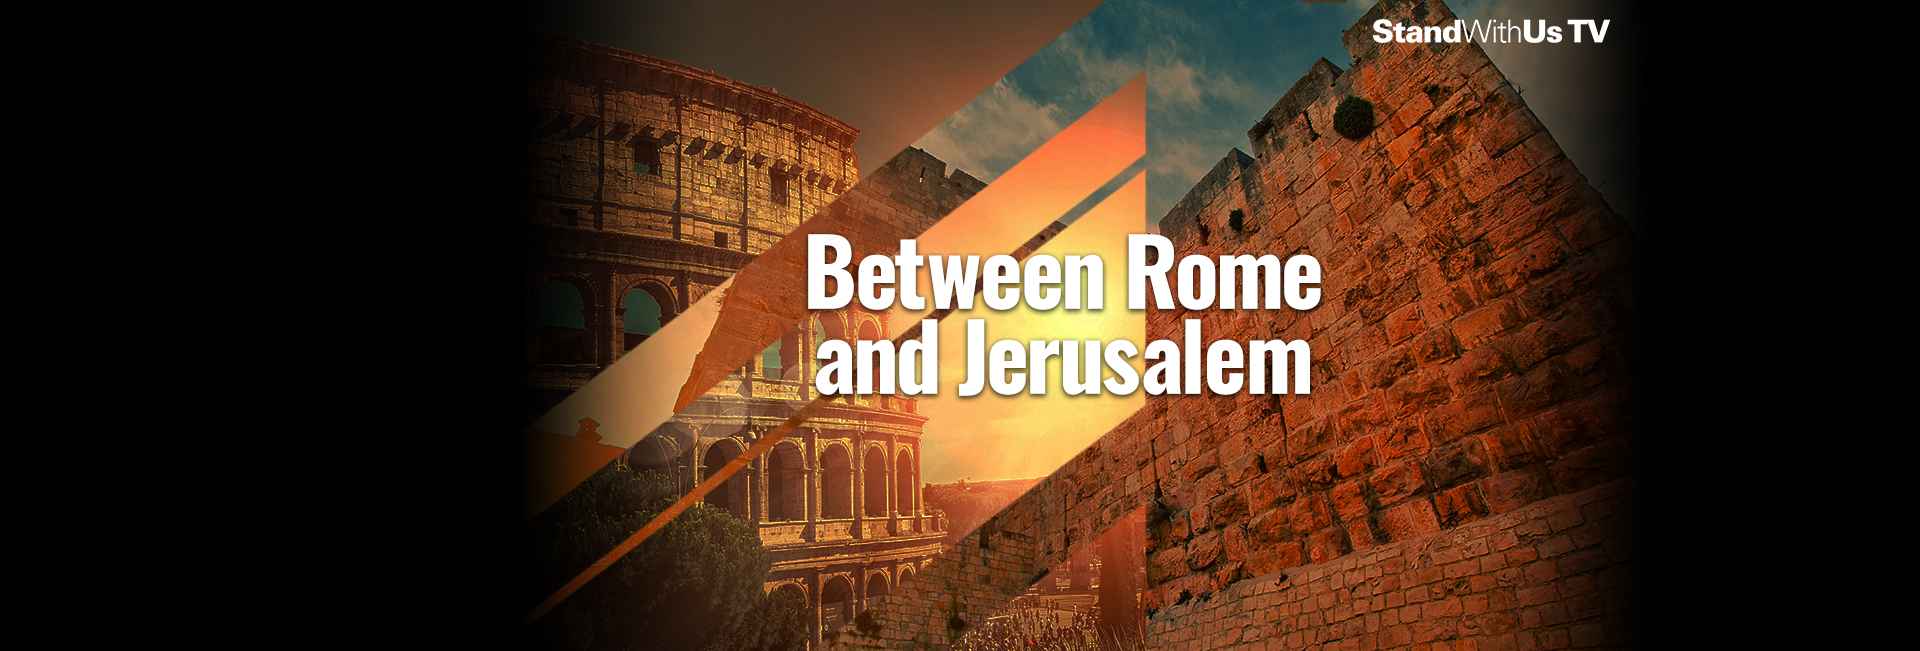 Between Rome and Jerusalem Episode 2: La Piazza – Jewish Ghetto of Rome